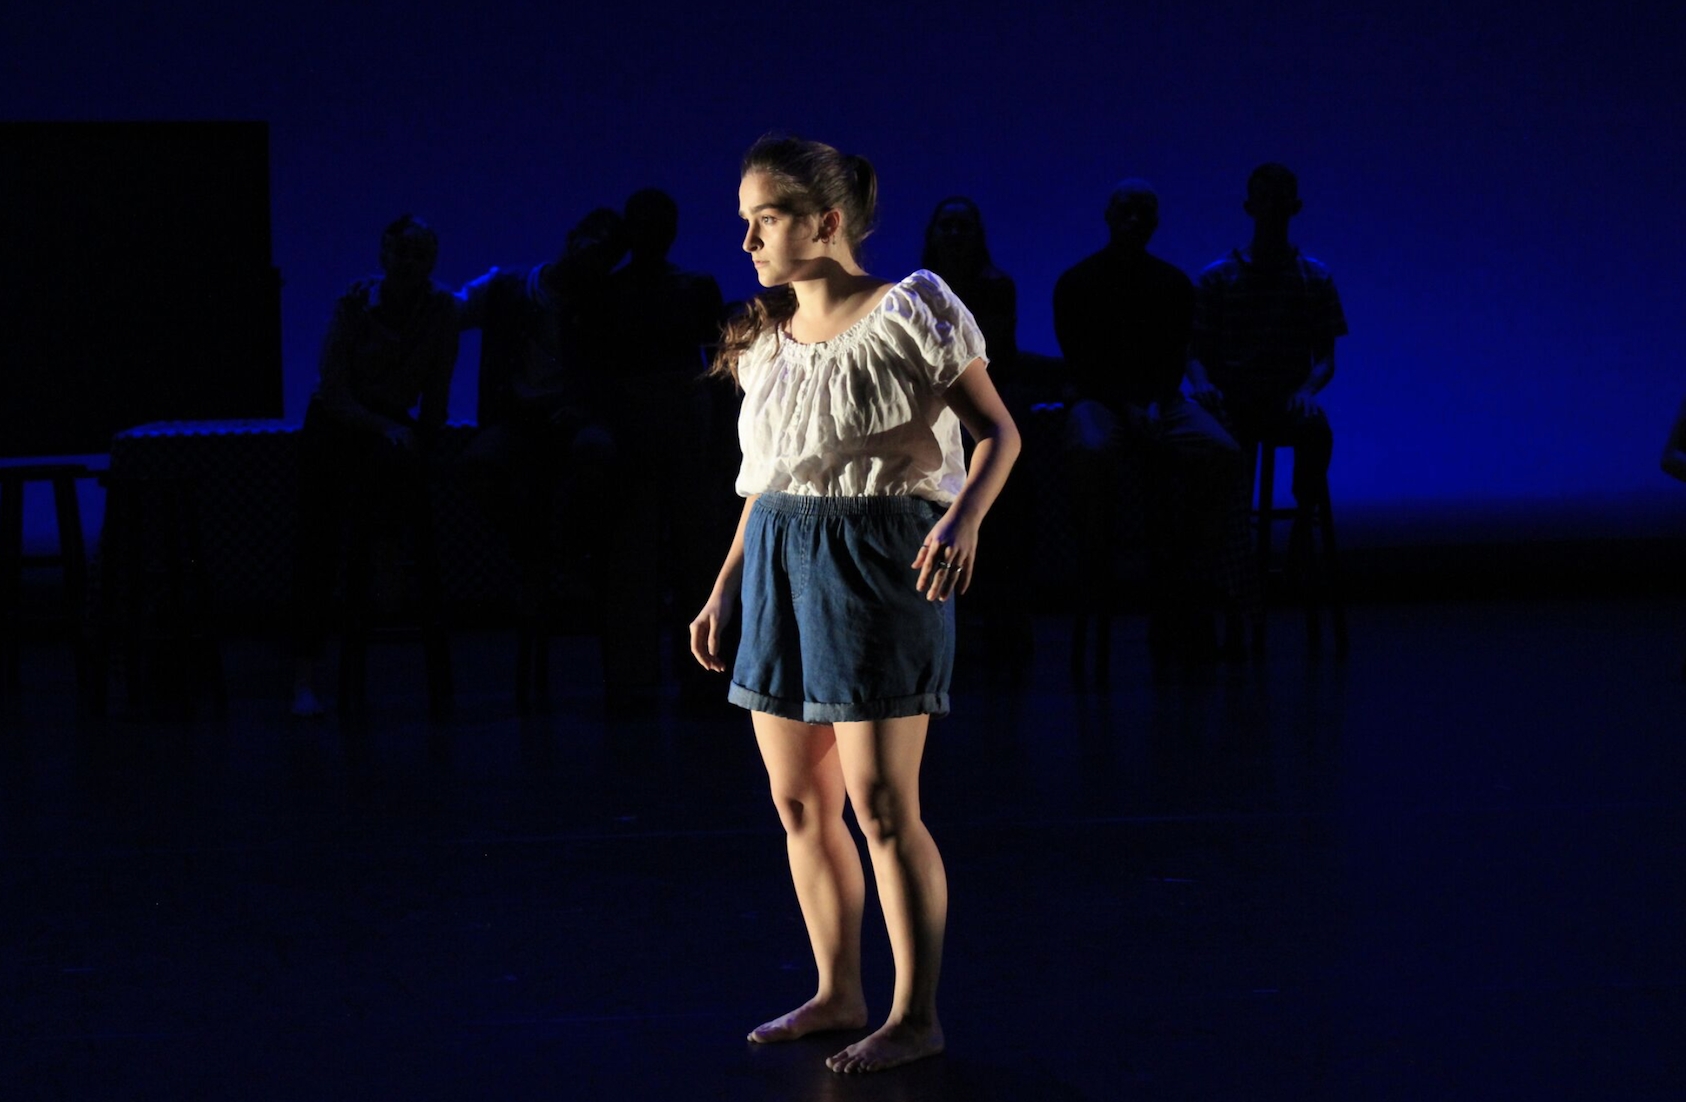 Reverie Choreographed by Jasmine Domfort, photo by Sam Spence.